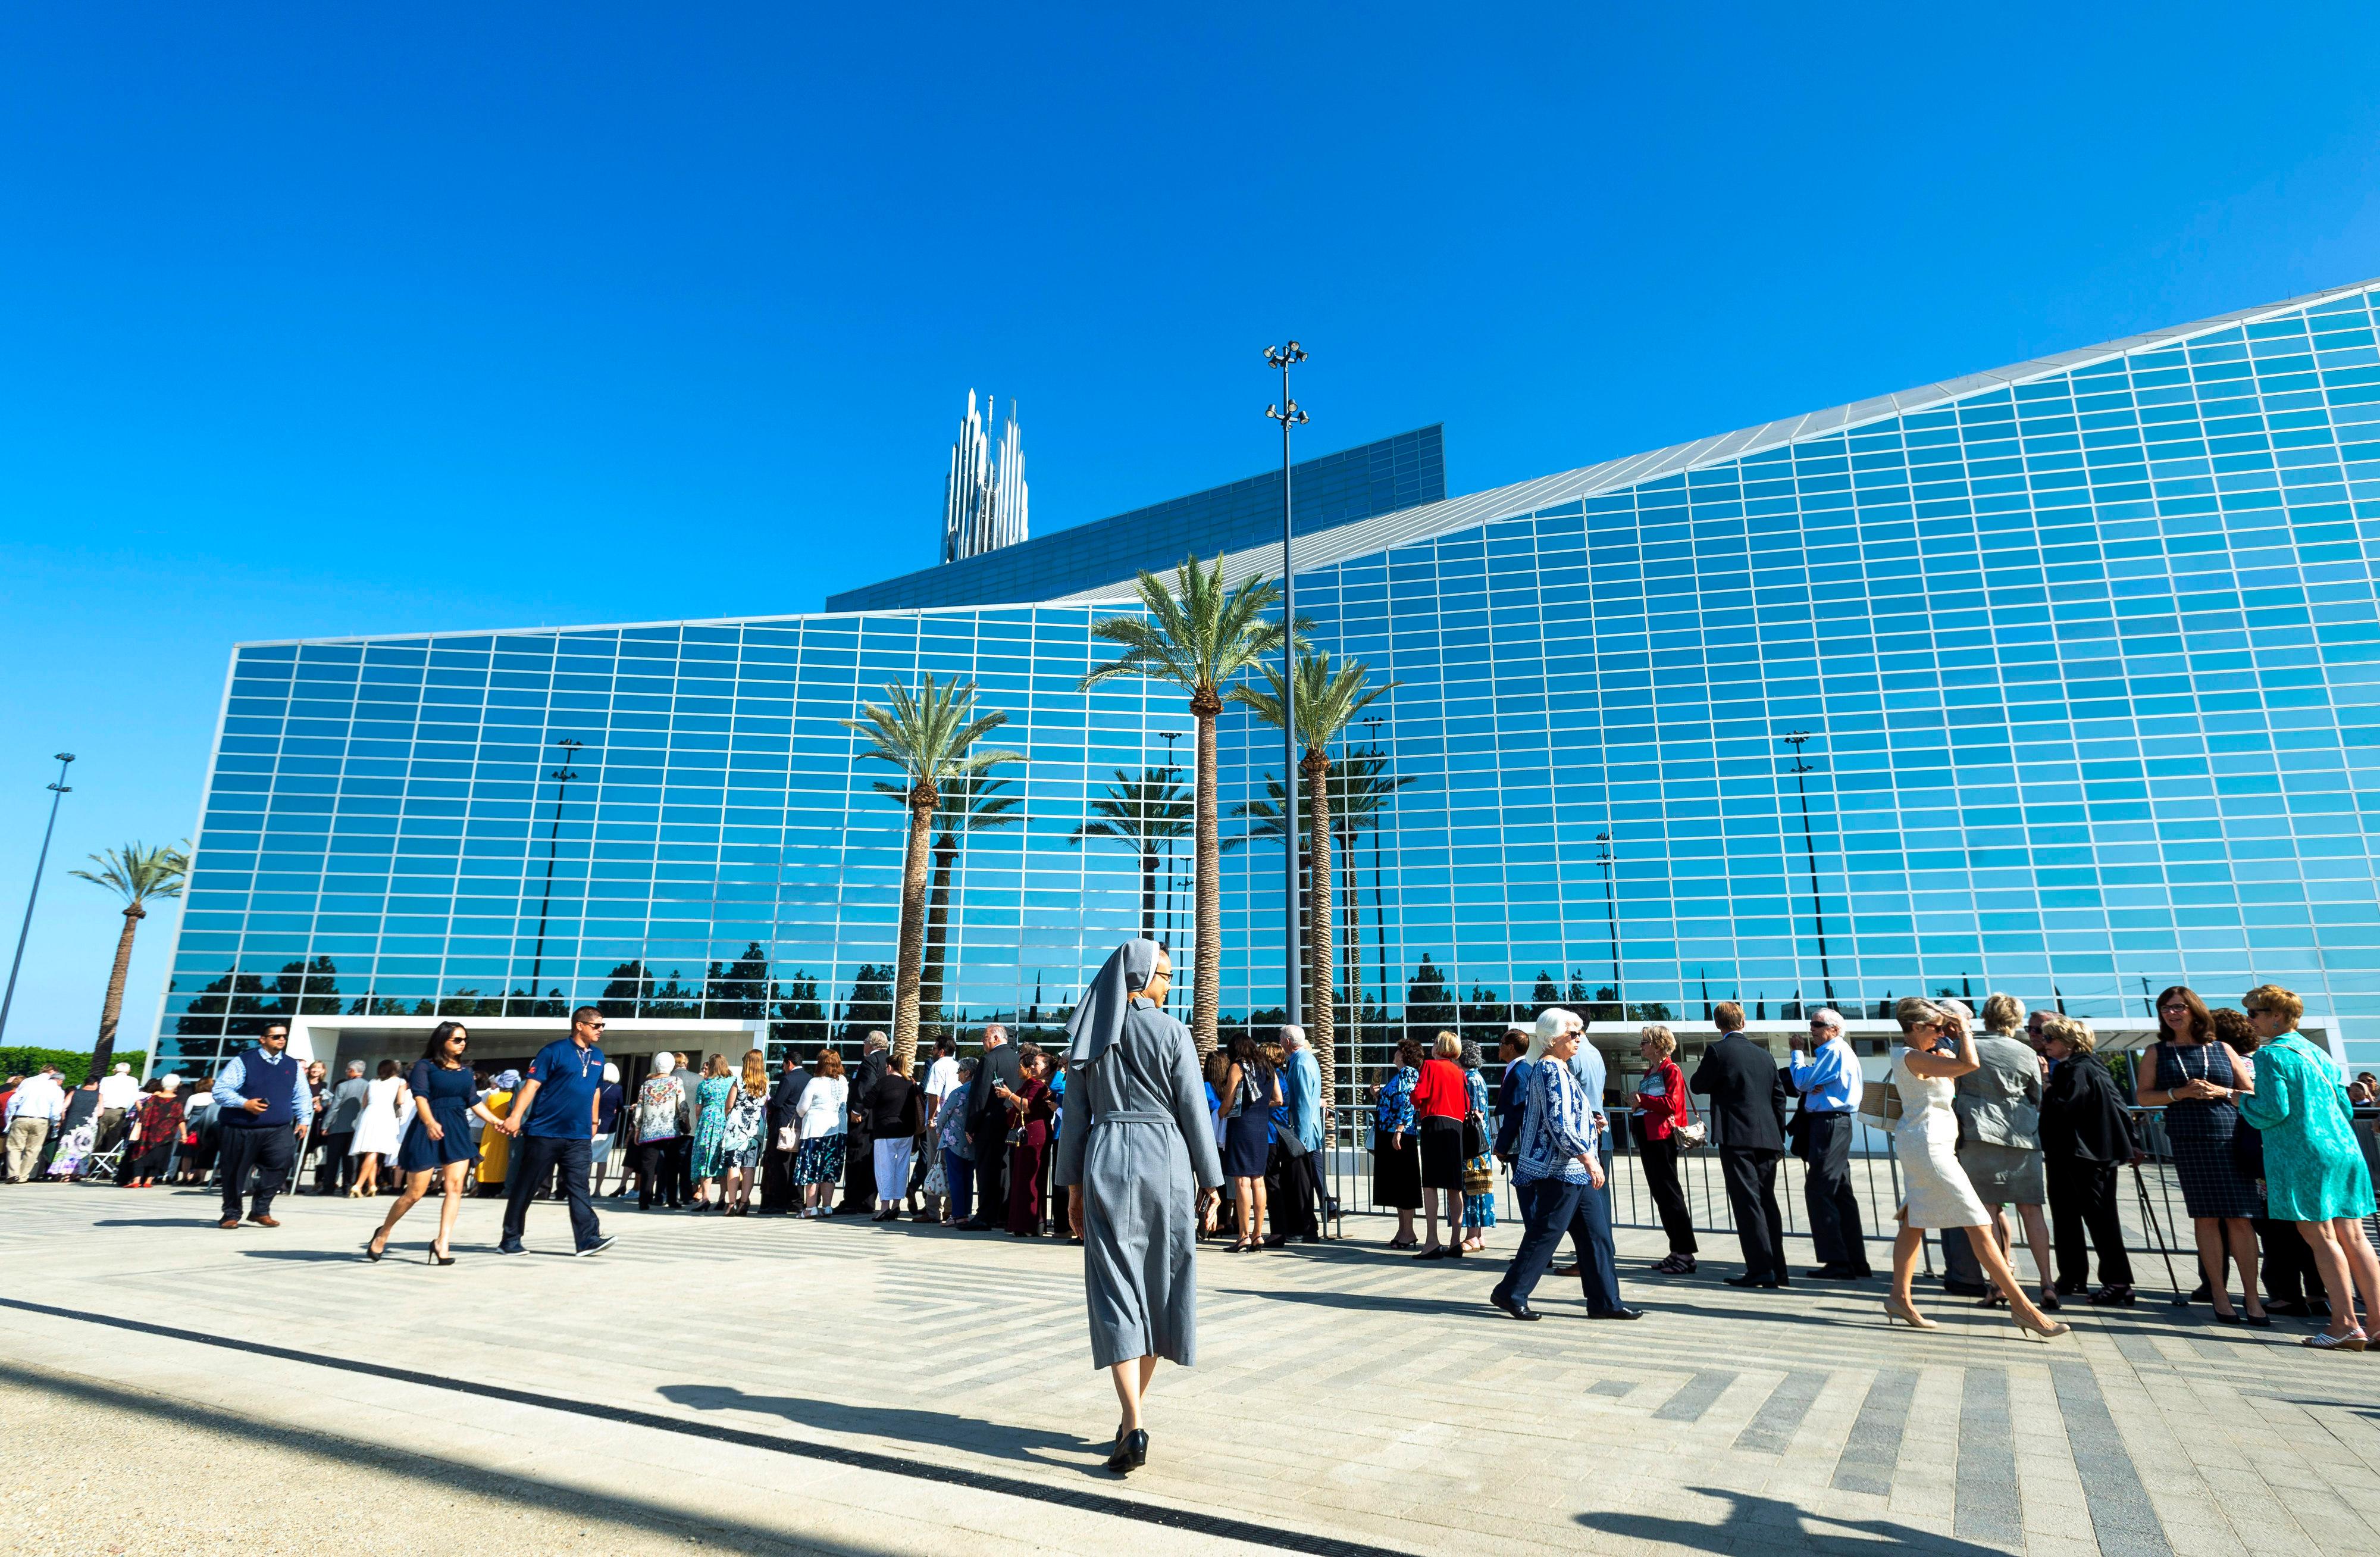 Guests arrive at the Christ Cathedral Solemn Mass of Dedication in Garden Grove, Calif., on Wednesday, July 17, 2019. More than 2,000 guests attended the event that marked the opening of the building, now known as Christ Cathedral, the new home of the Diocese of Orange. The landmark was long known as Rev. Robert H. Schuller's Crystal Cathedral. (Paul Bersebach/The Orange County Register via AP)